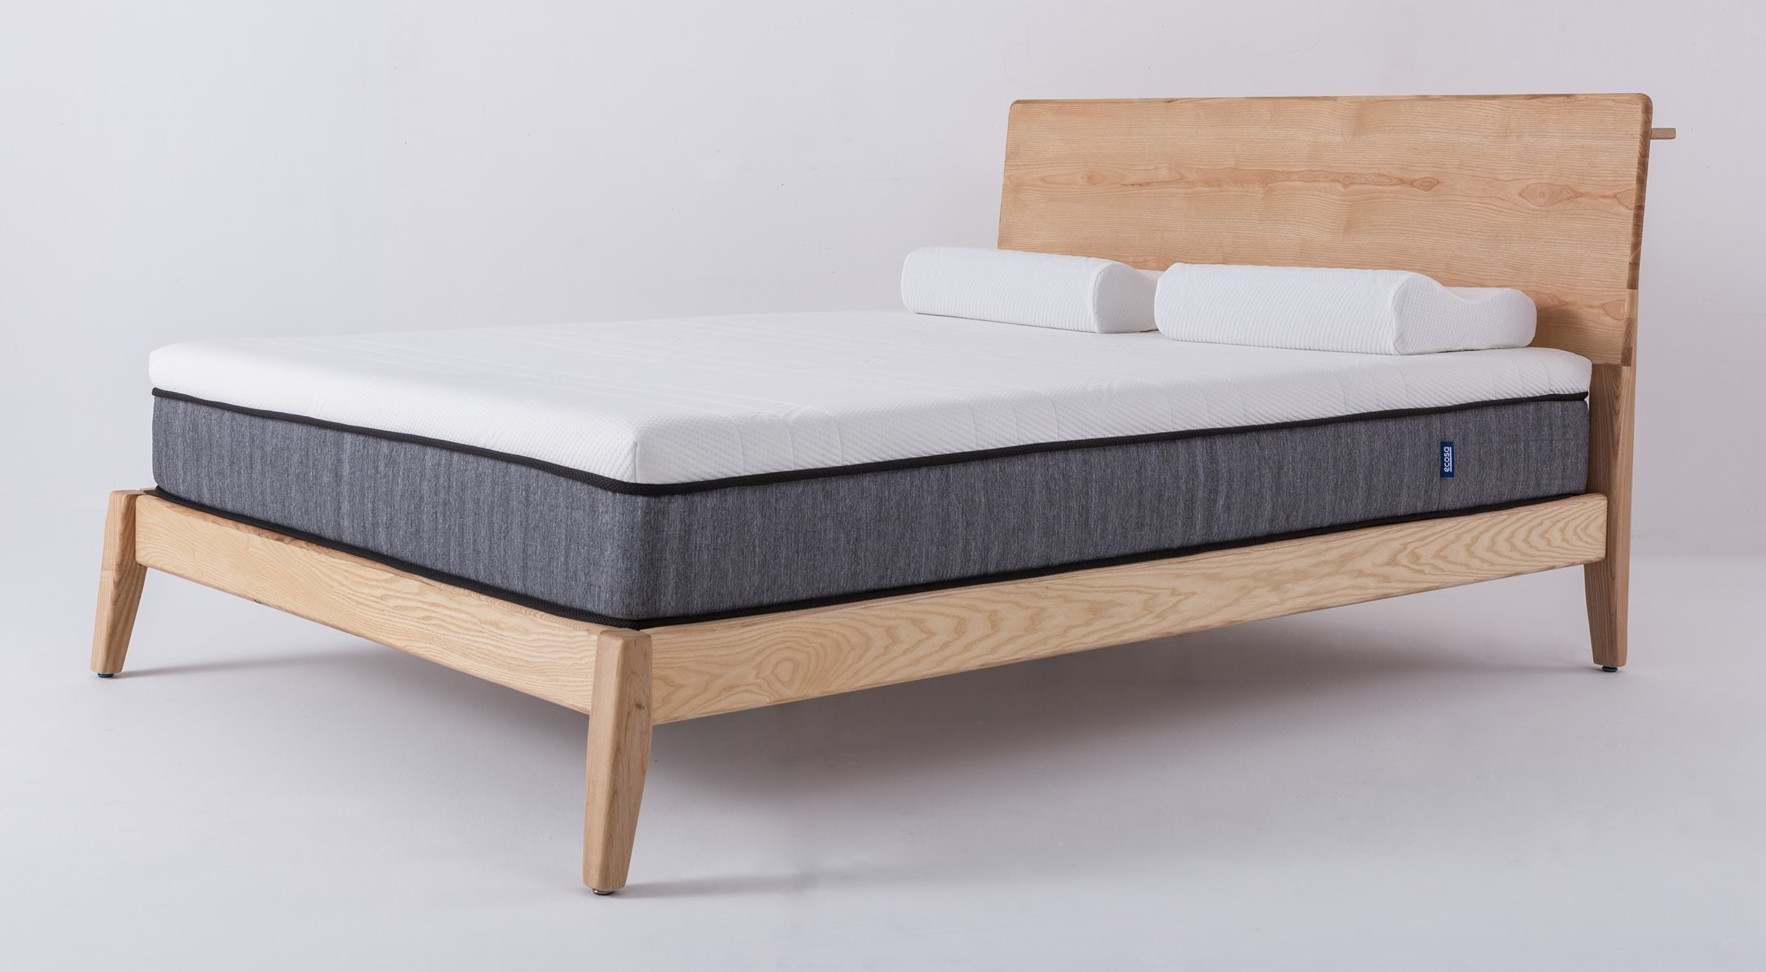 A spare mattress in polyurethane foam for an extra bed or guest bed twist bed 70 x 195cm 80X195 